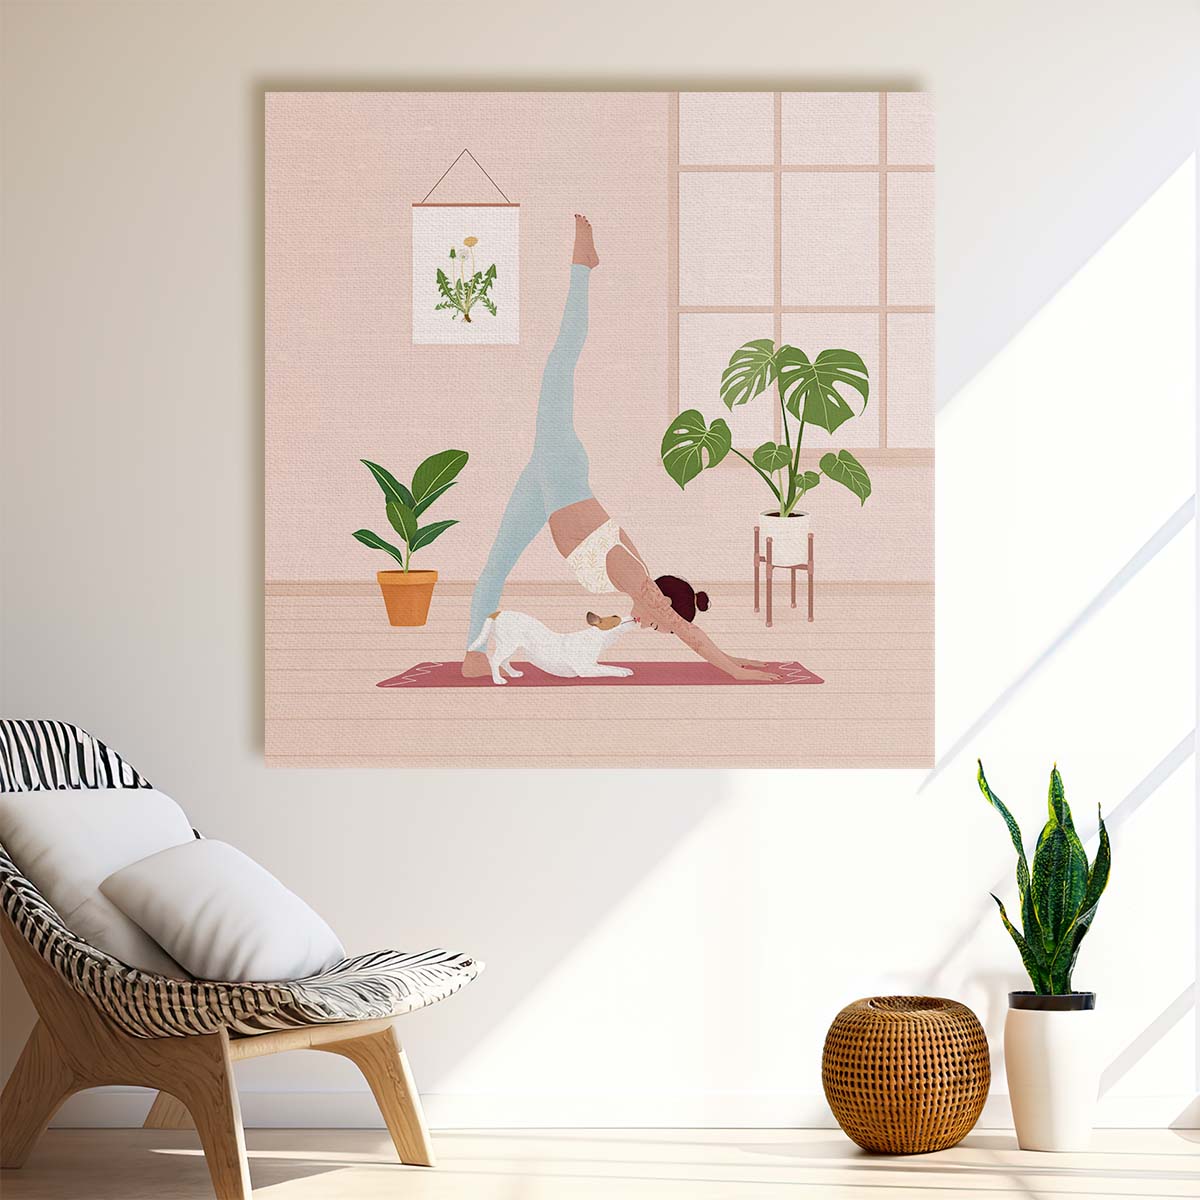 Downward Dog Pose Yoga Woman Illustration Wall Art by Luxuriance Designs. Made in USA.